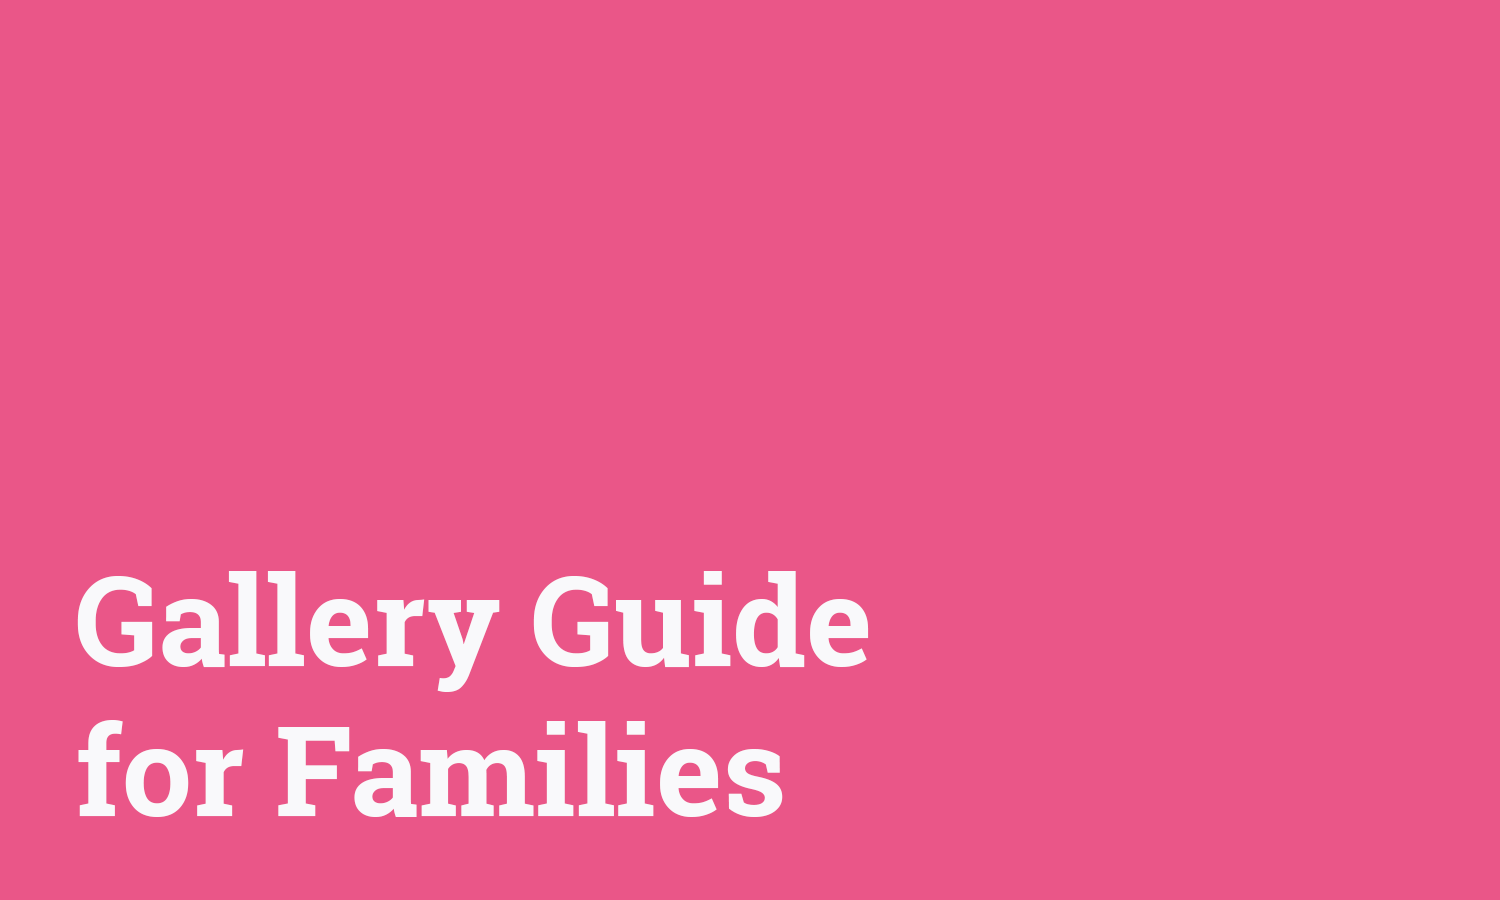 White text on pink background that reads "Gallery Guide for Families"